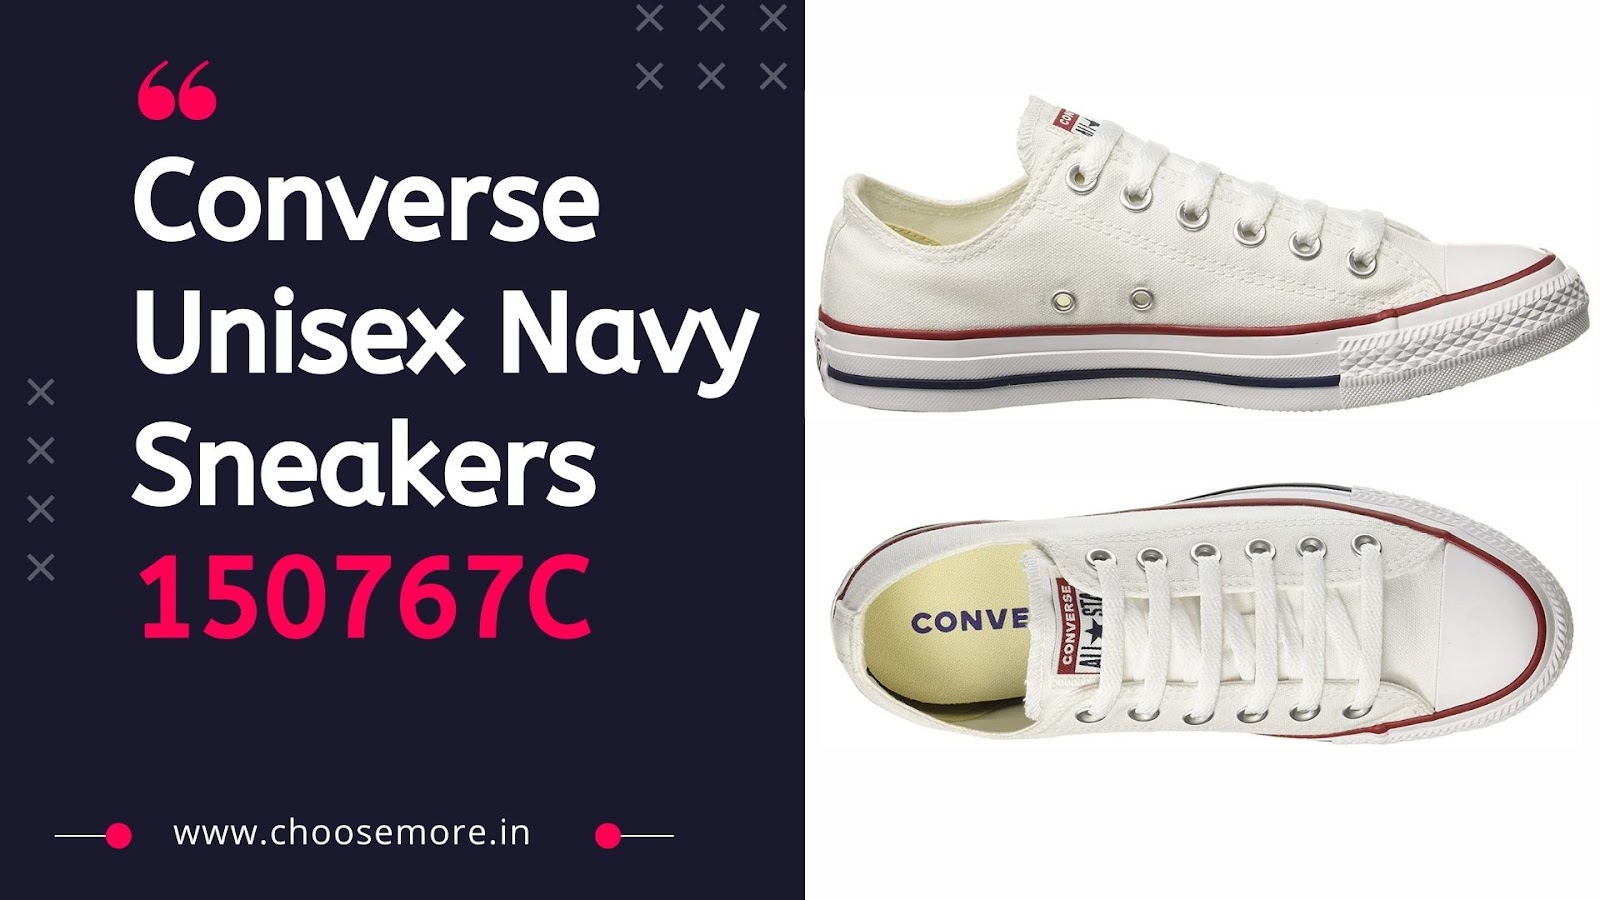 Converse white Unisex Navy Sneakers